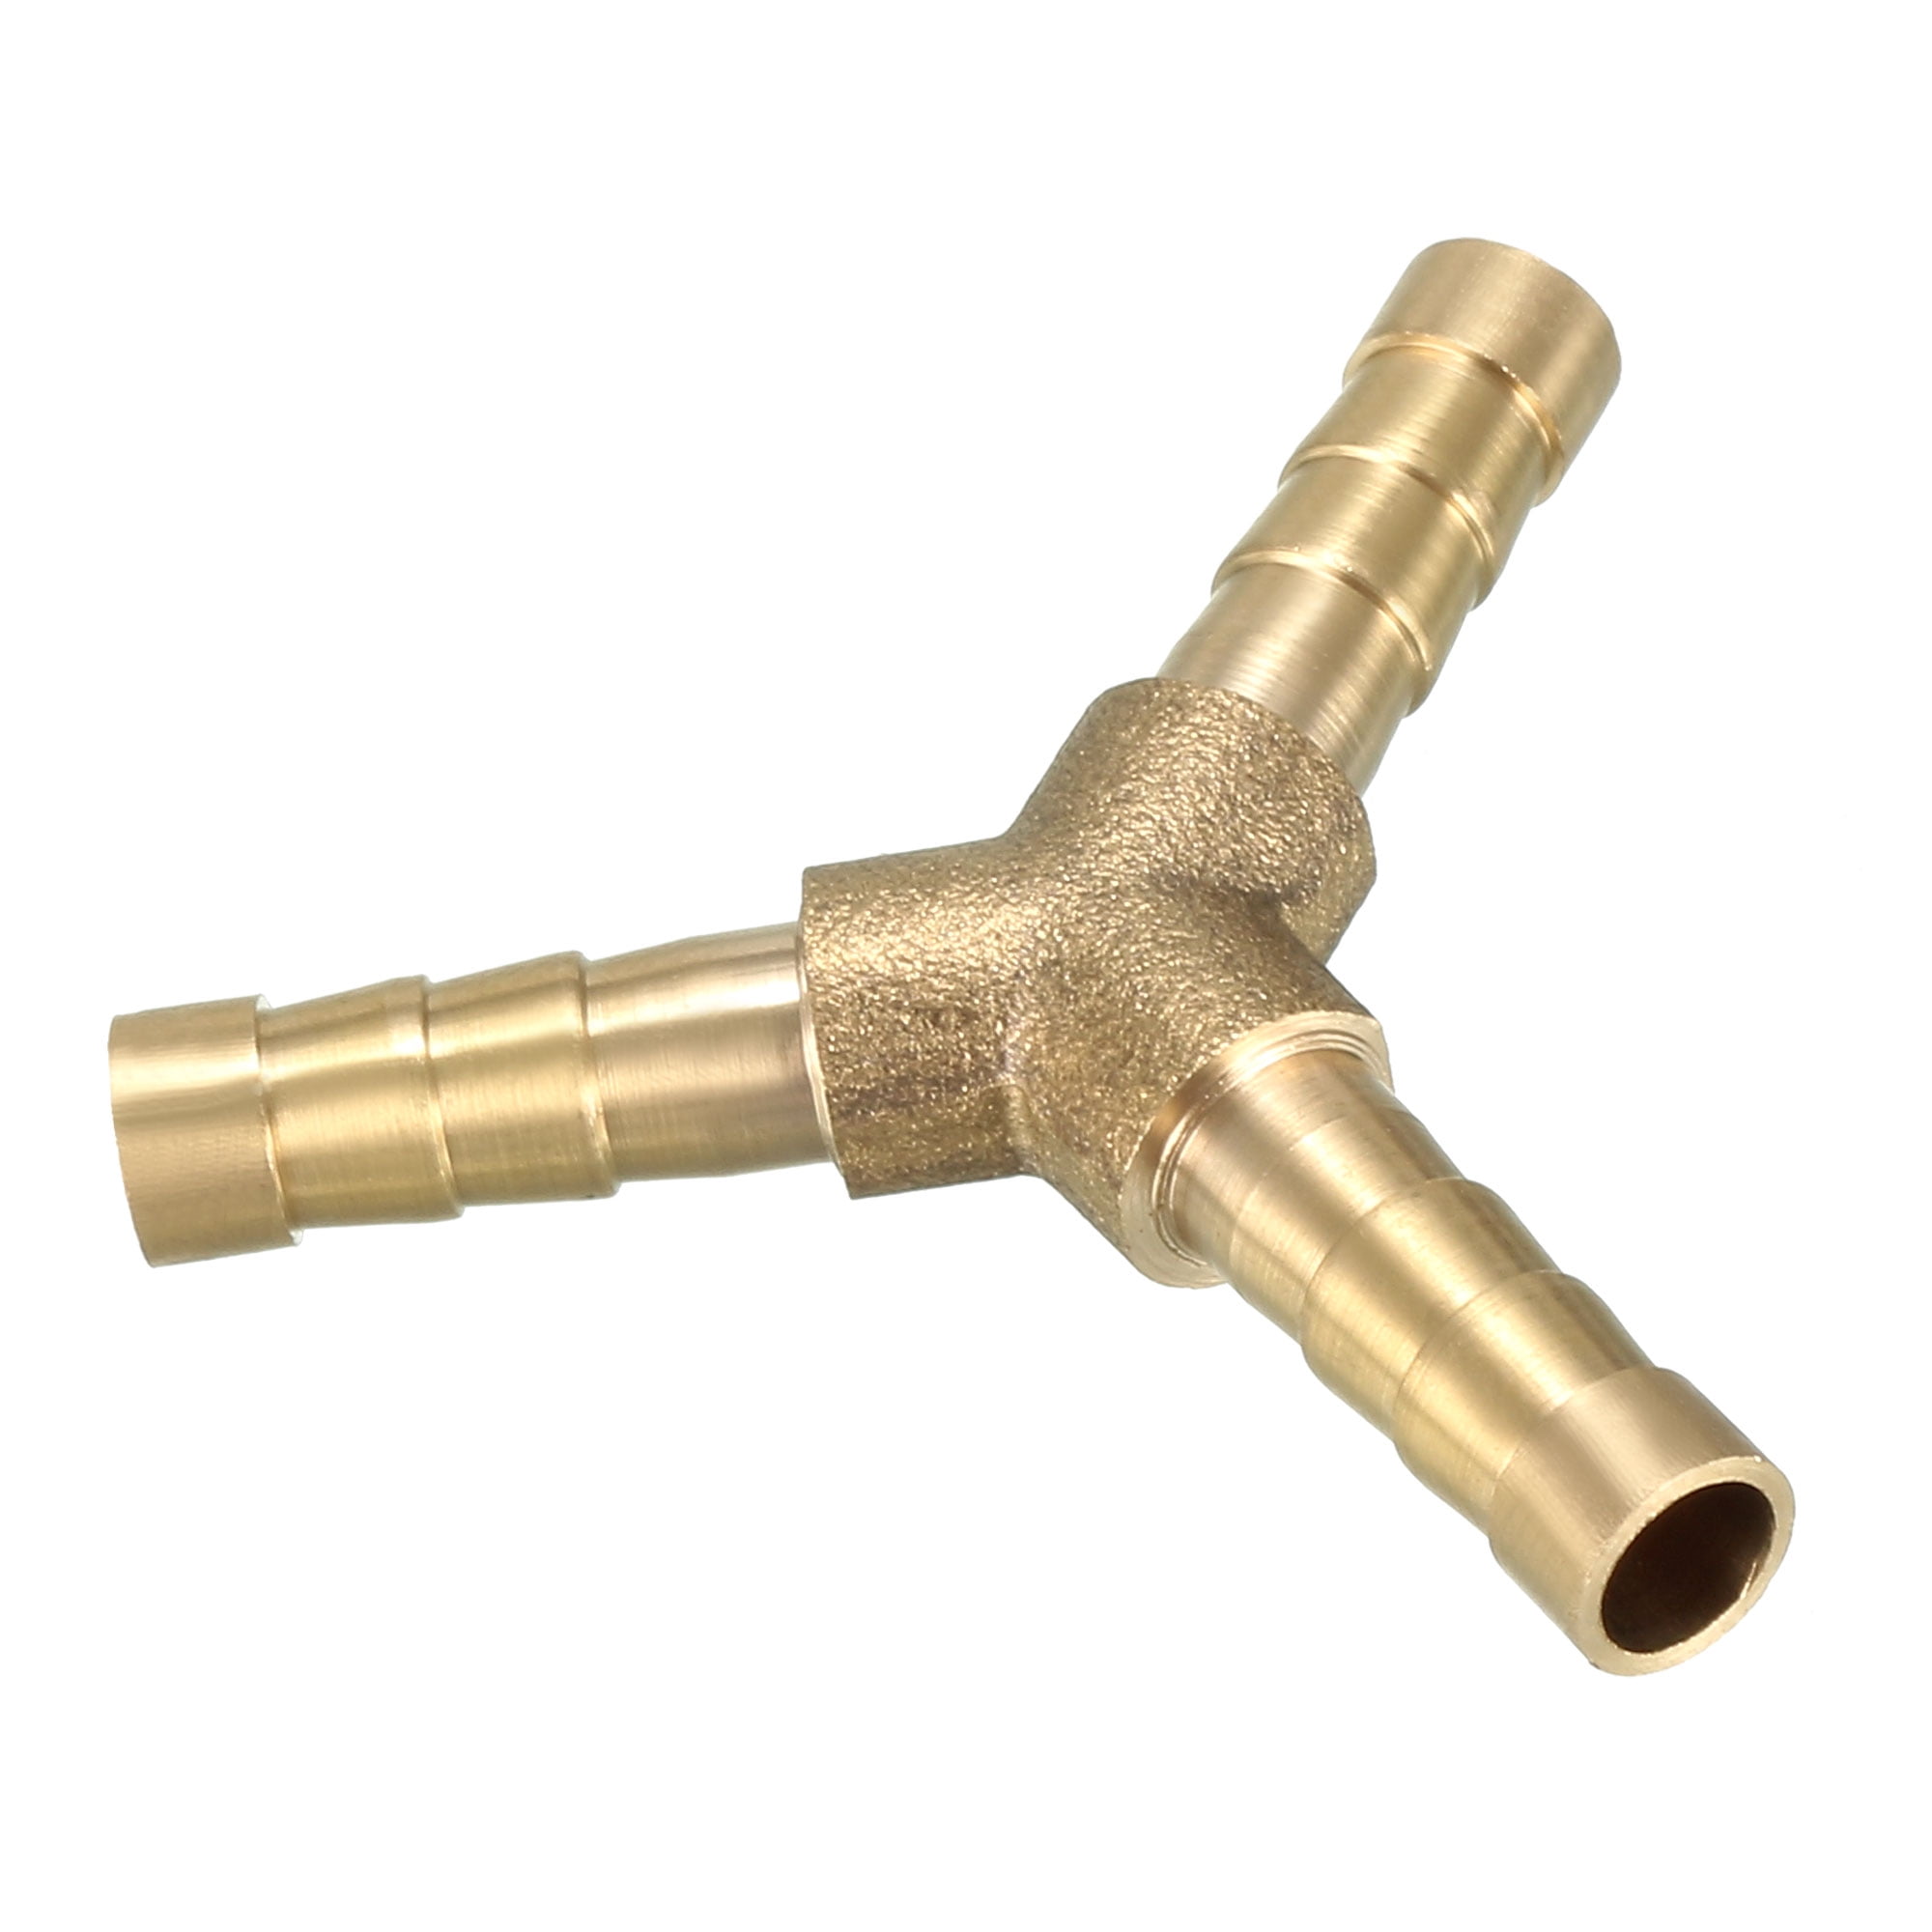 6mm Brass Barbed Y Piece 3 Way Fuel Gas Water Hose Joiner Adapter Fitting 